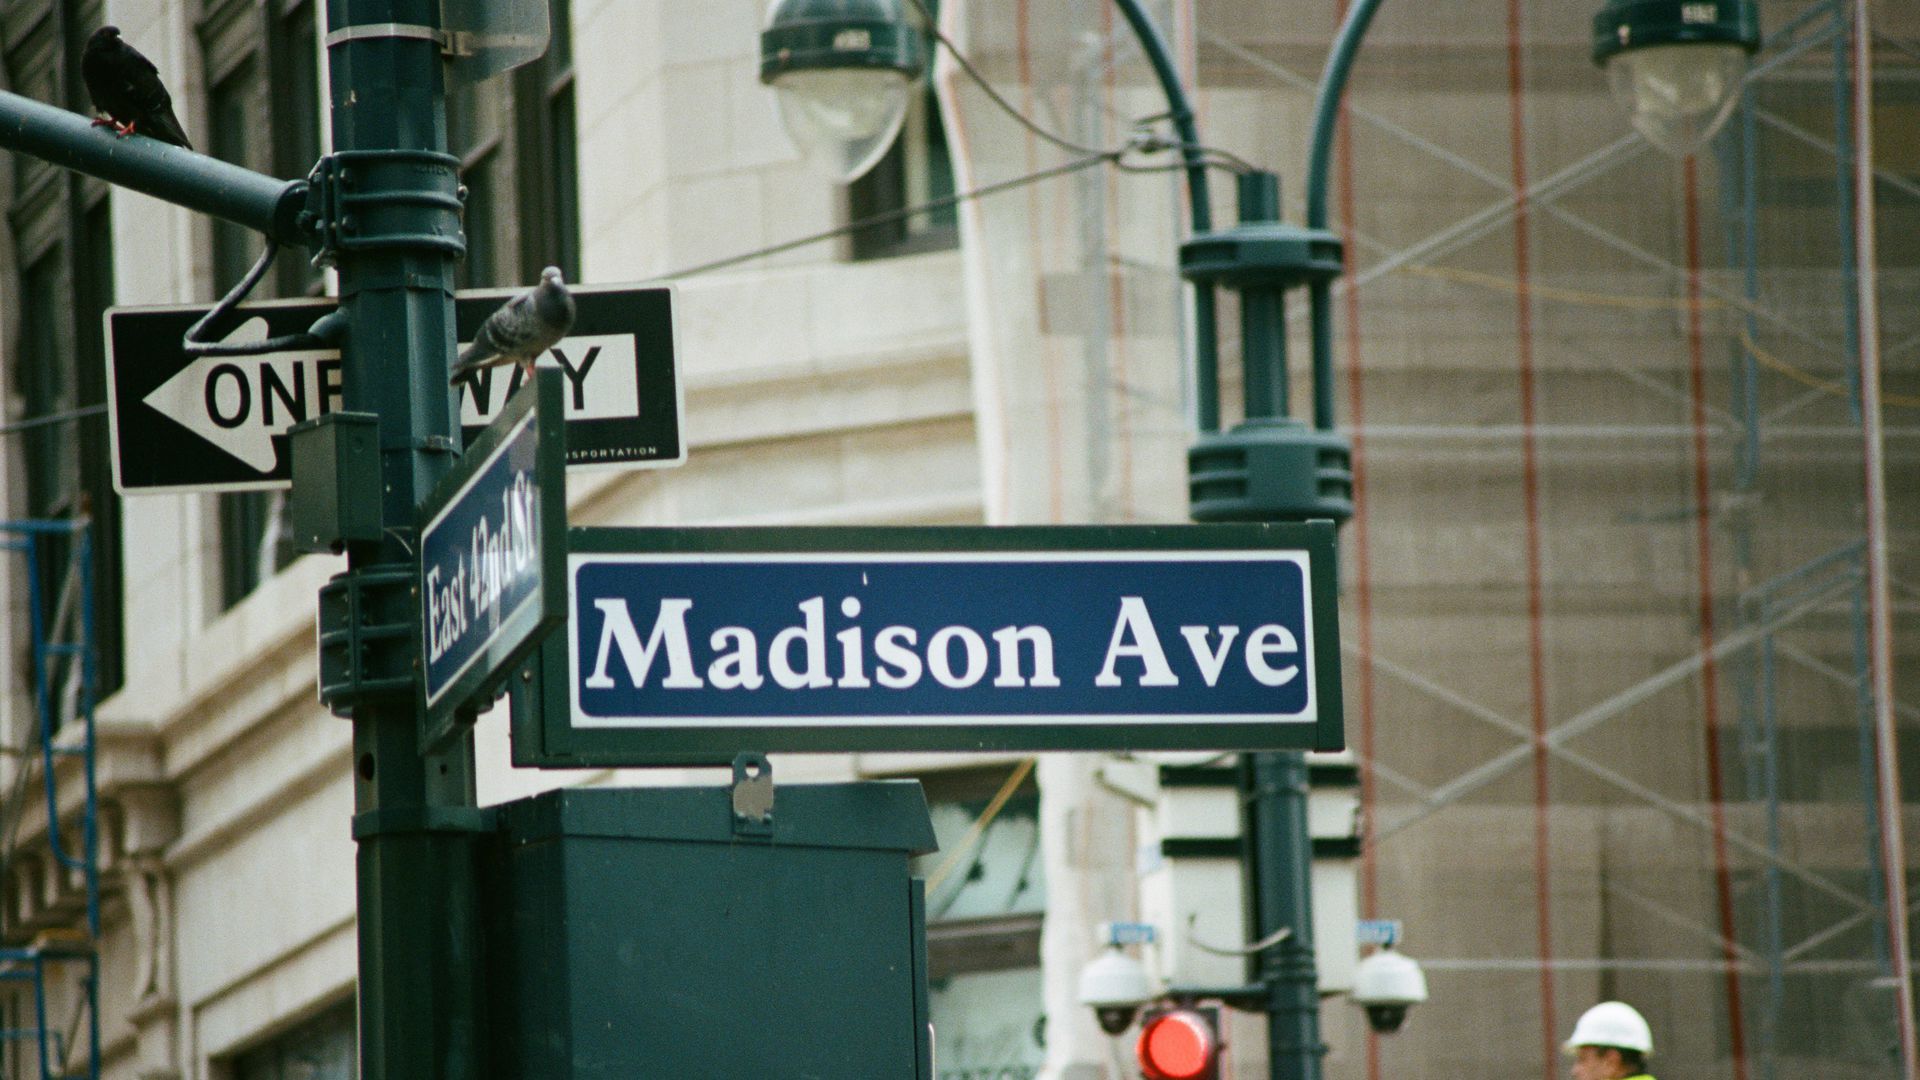 In this image, the street sign for Madison Avenue in New York is visible. 